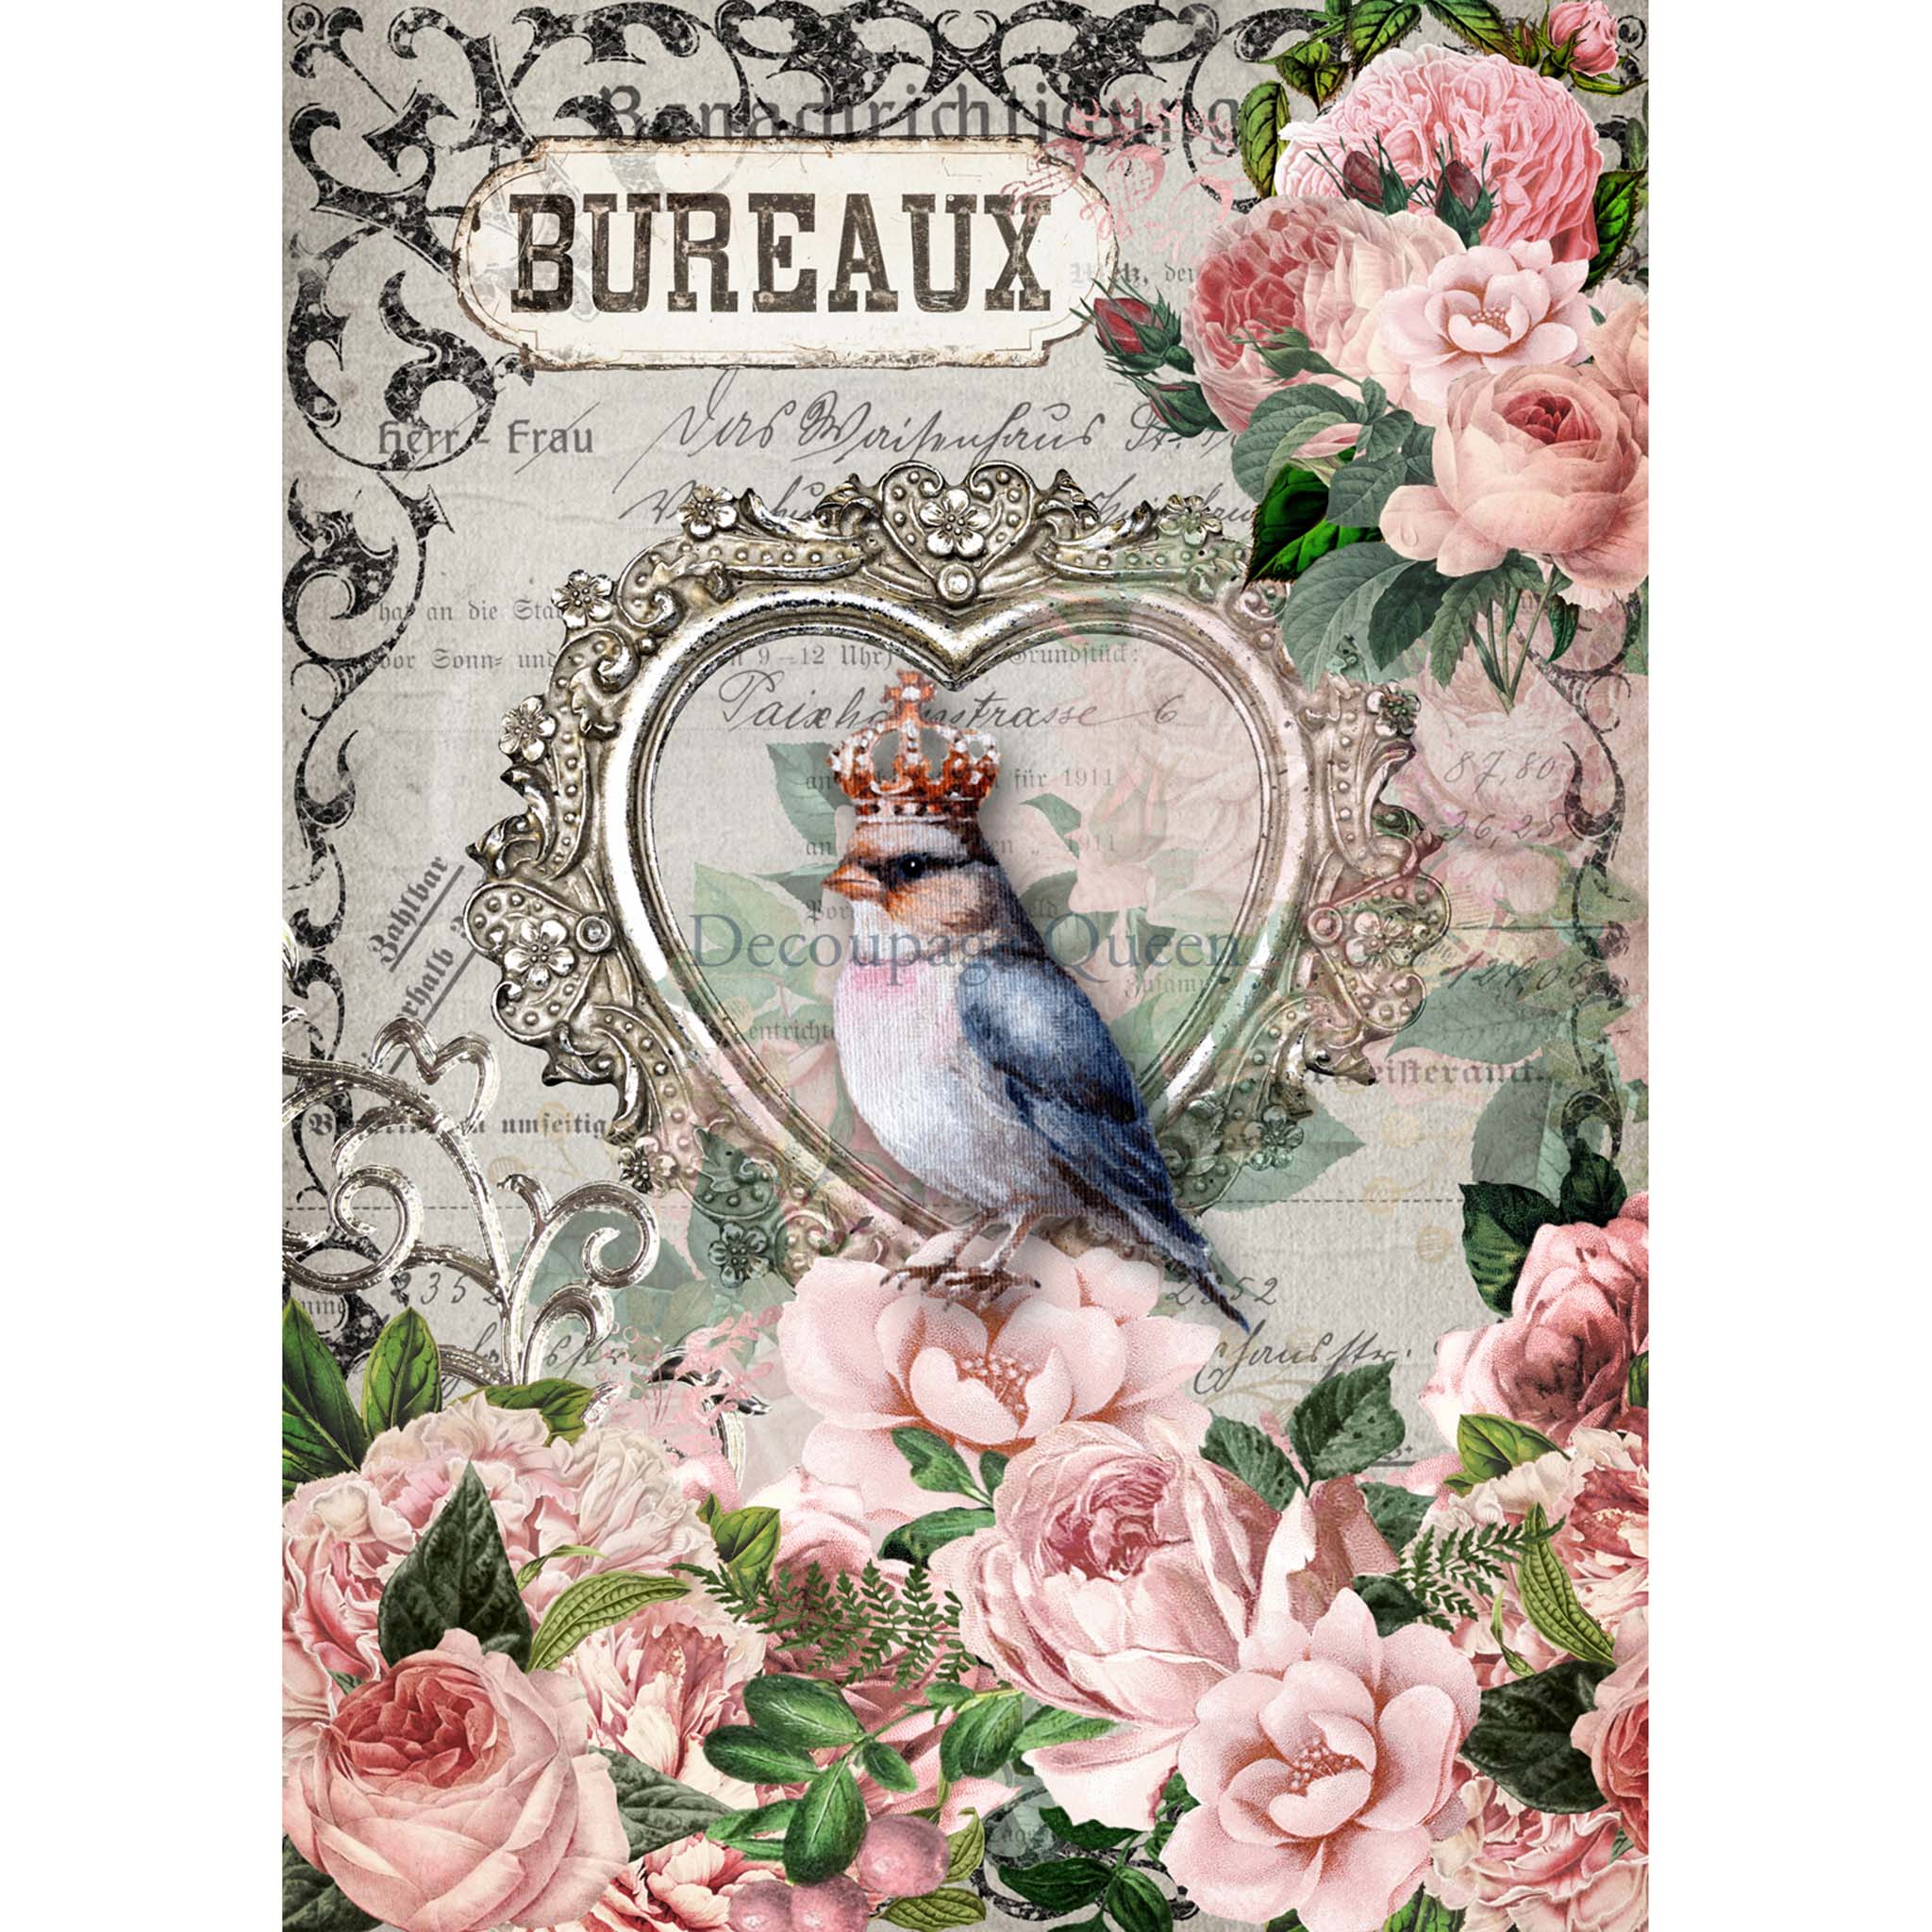 A1 rice paper design that features delicate pink roses, a charming bluebird wearing a crown while sitting in a heart picture frame, and a vintage French document. White borders are on the sides.